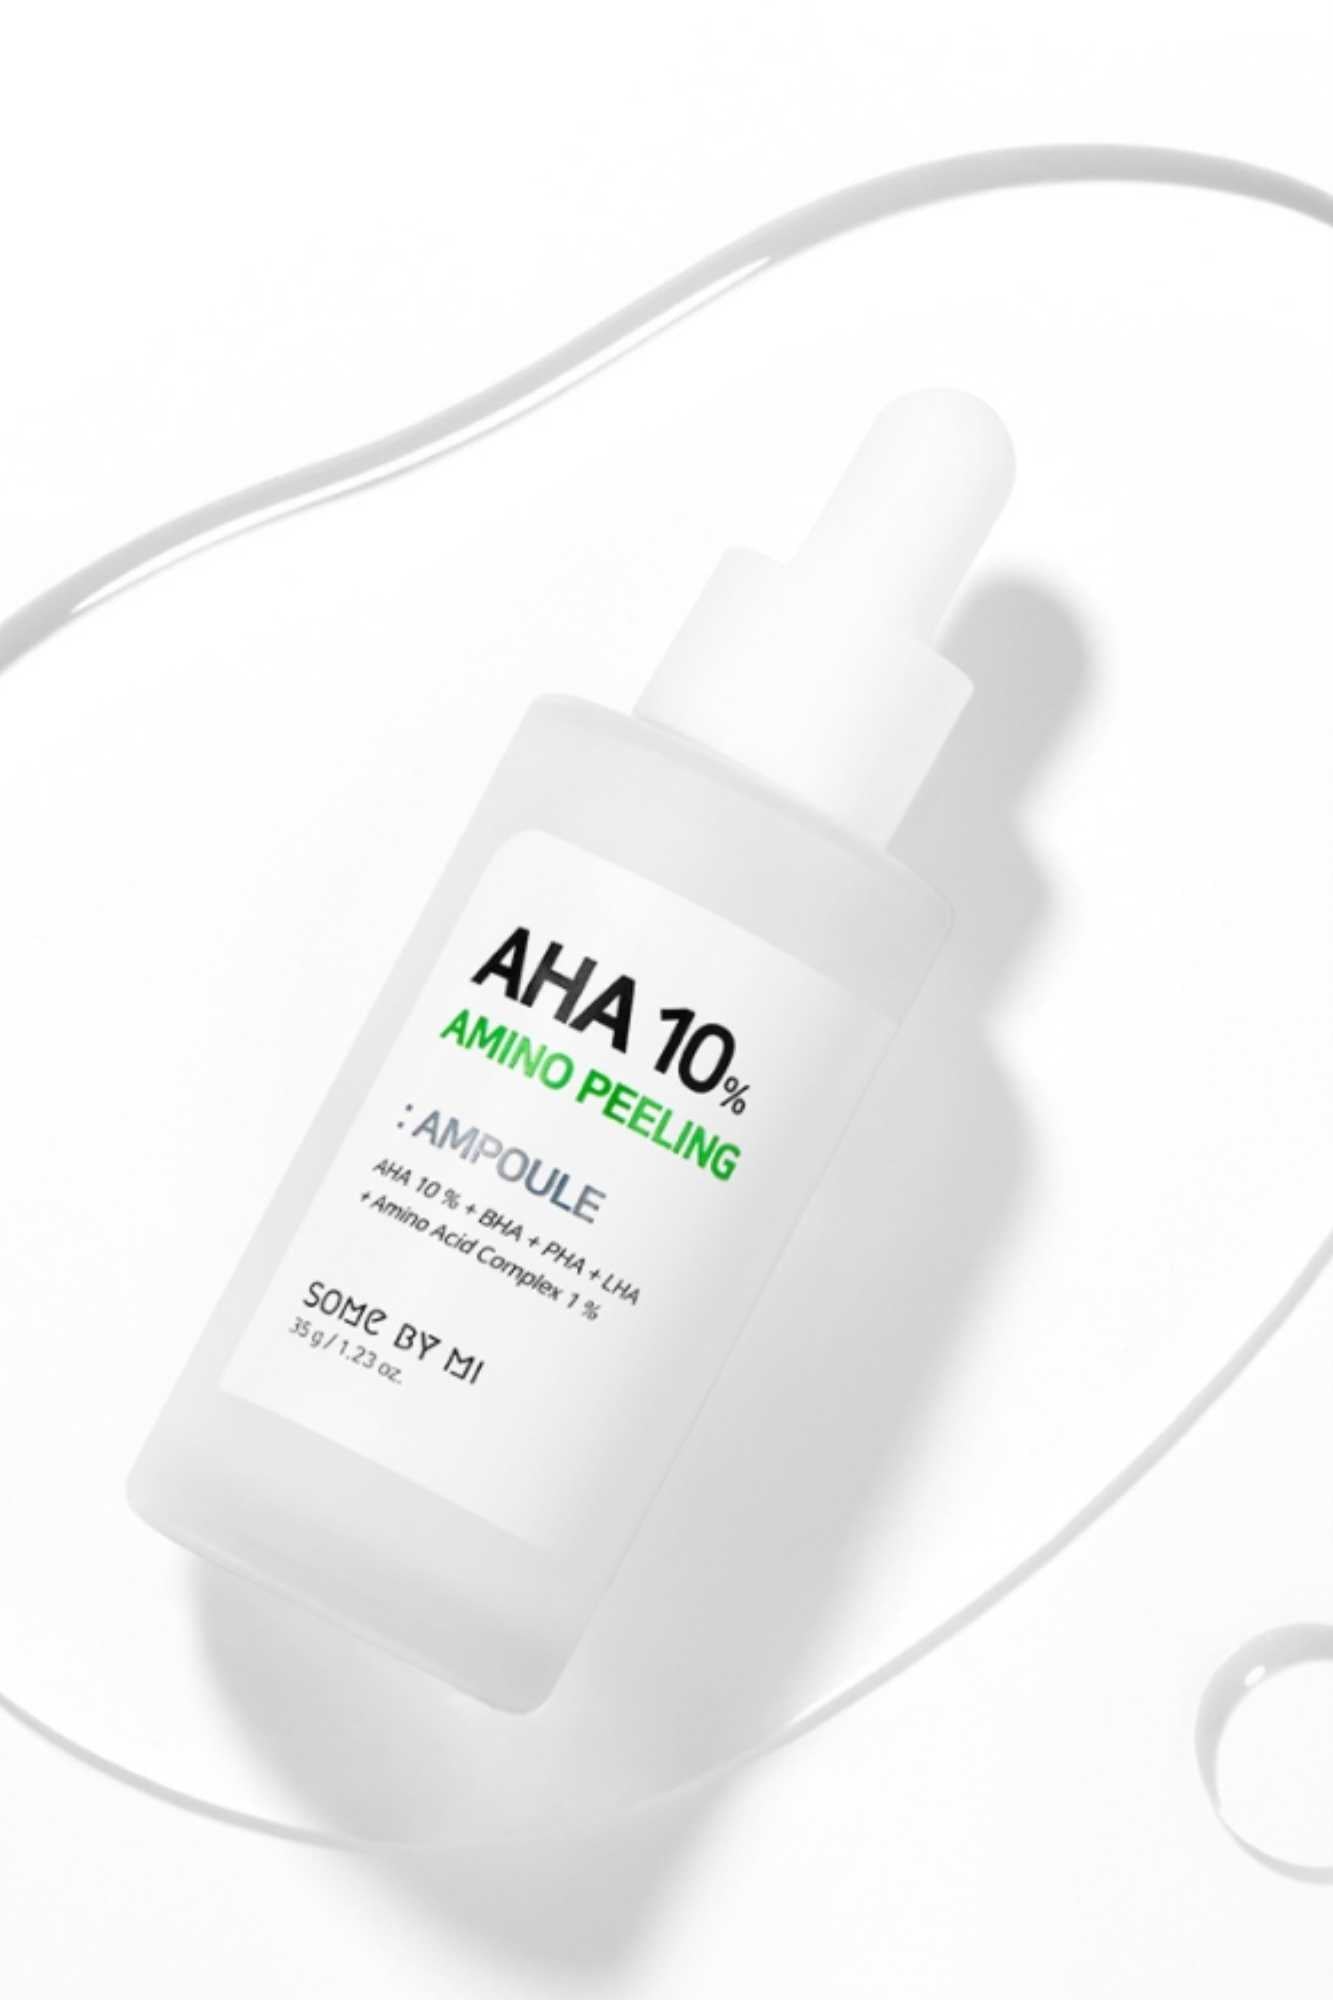 Some By Mi - AHA 10% Amino Peeling Ampoule - 35g